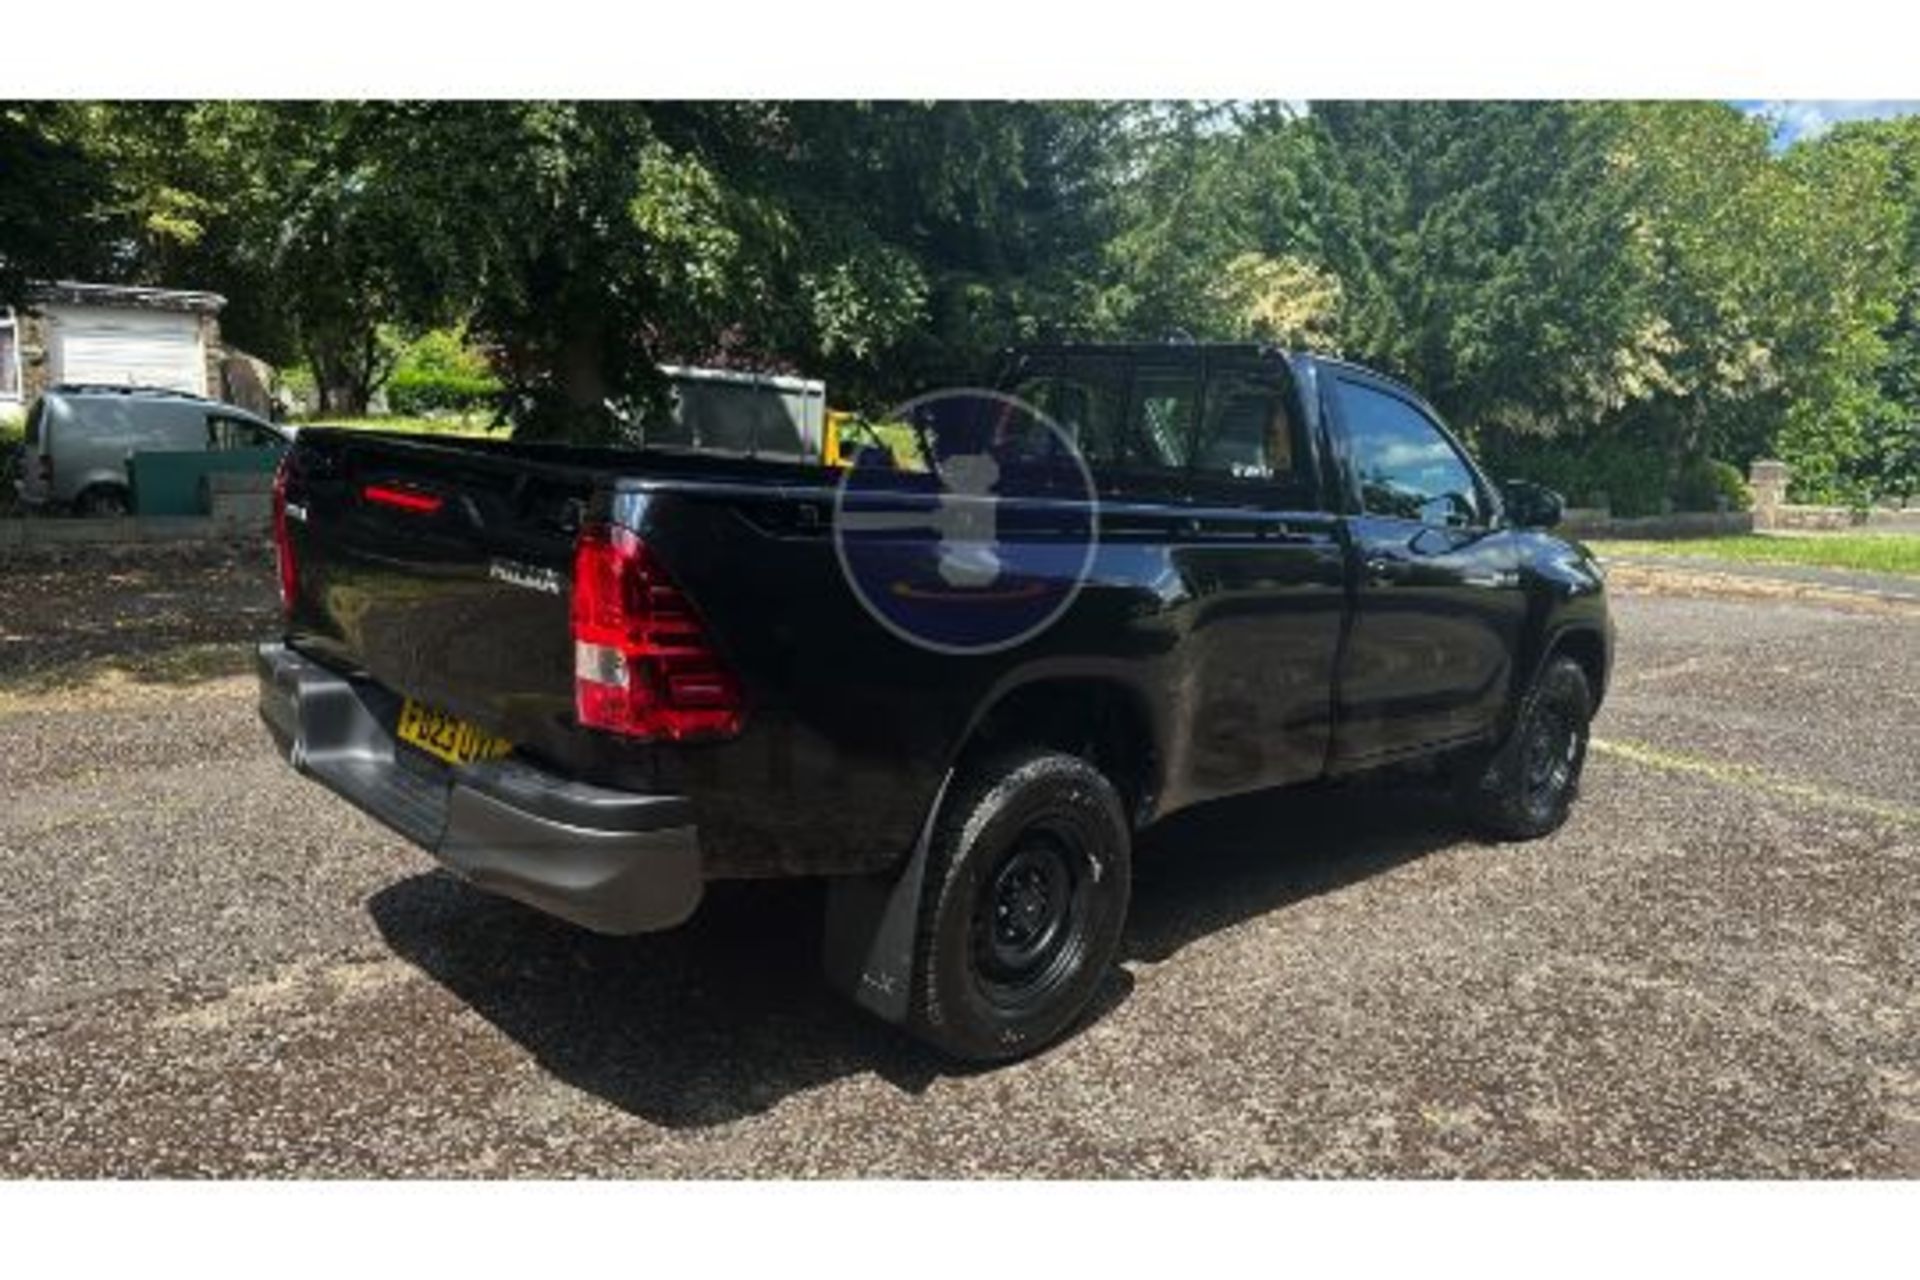 TOYOTA HILUX 2.4D-4D SINGLE CAB 4X4 PICK UP TRUCK - BLACK MODEL - 23 REG WITH DELIVERY MILES - WOW!! - Image 11 of 38